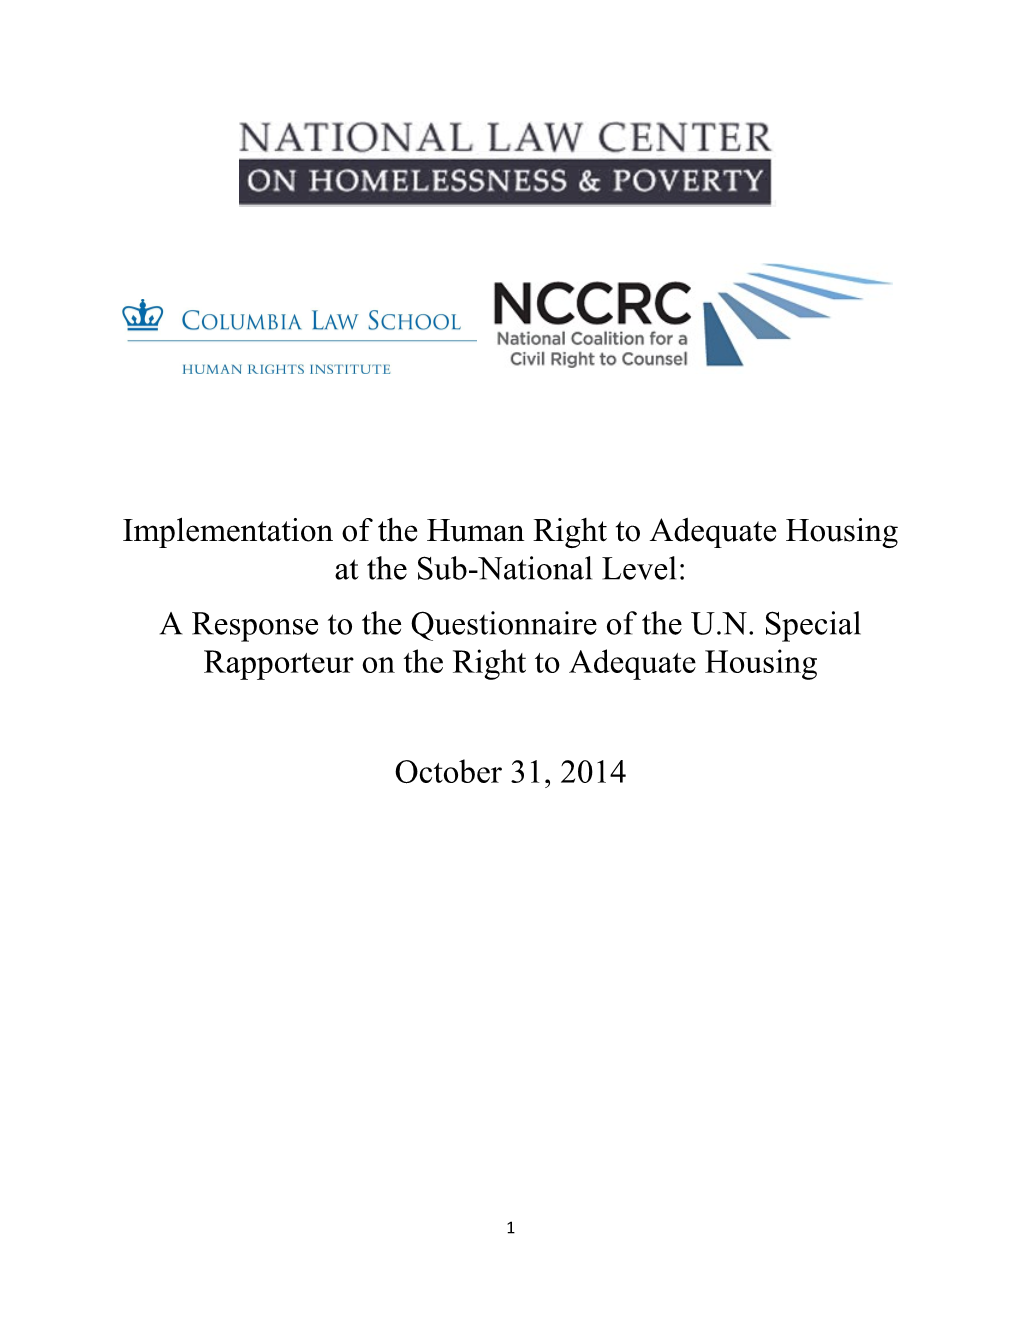 Implementation of the Human Right to Adequate Housing at the Sub-National Level